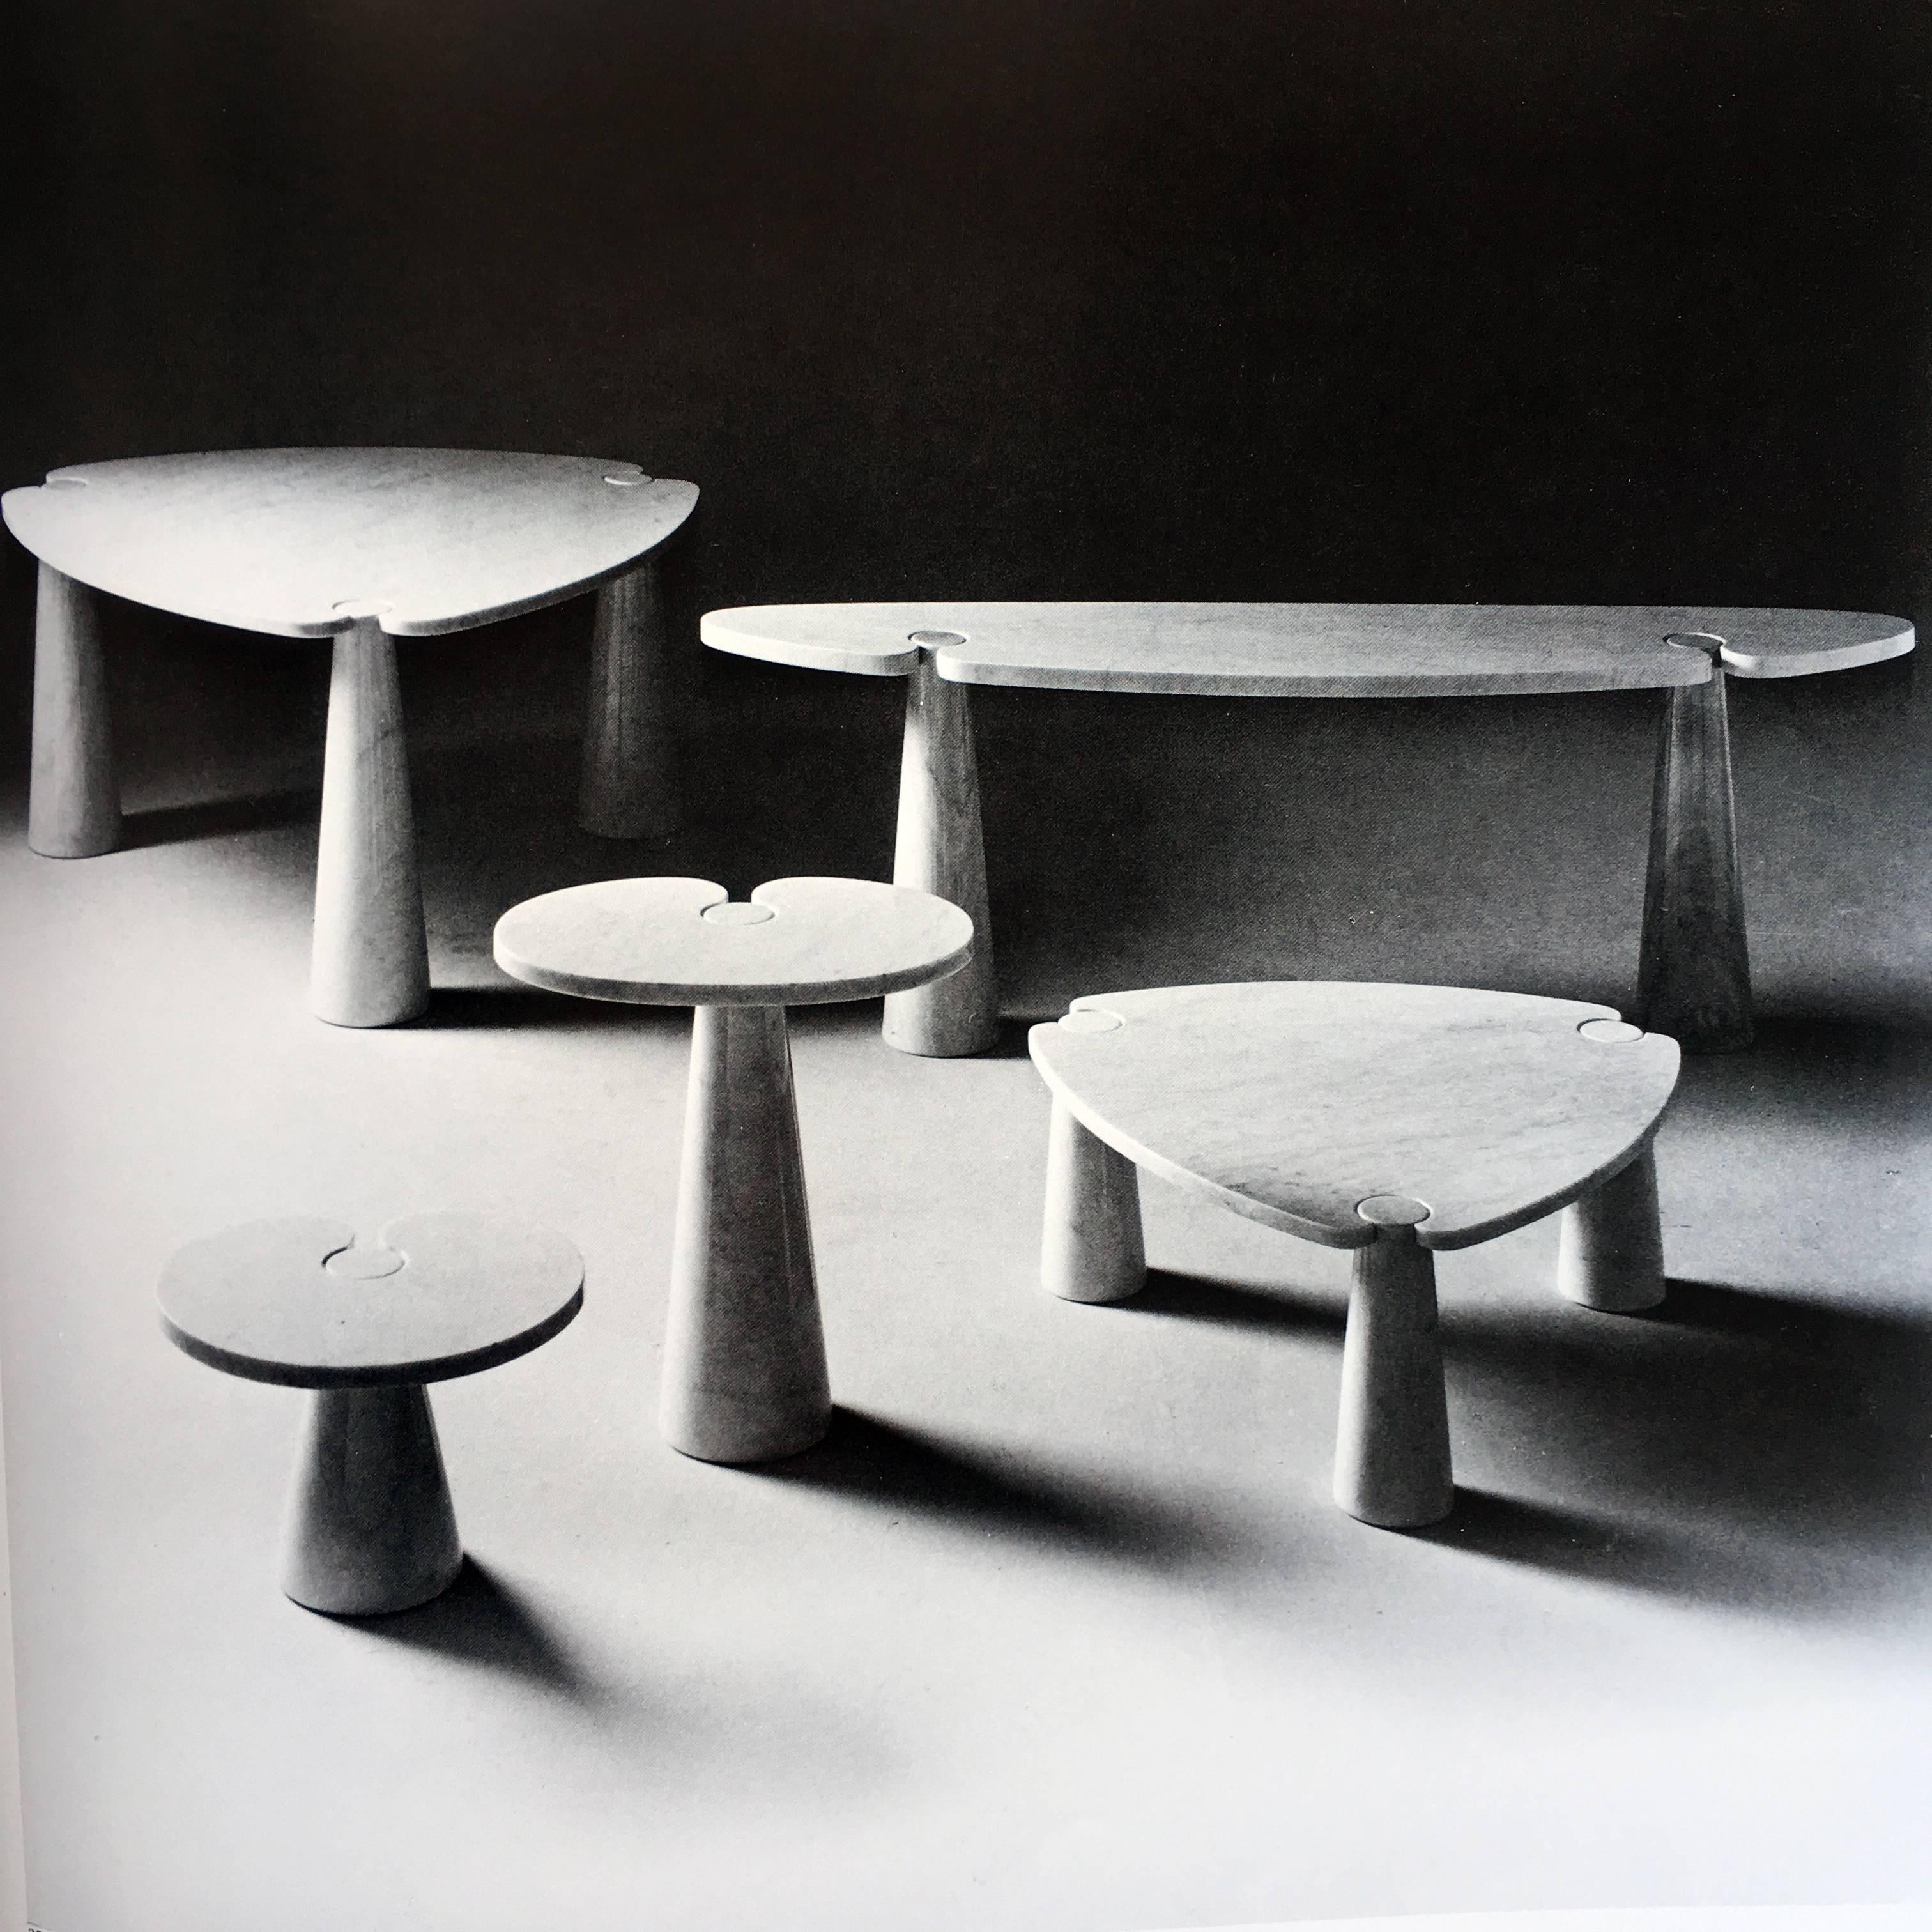 American Furniture by Architects – Marc Emery 1988